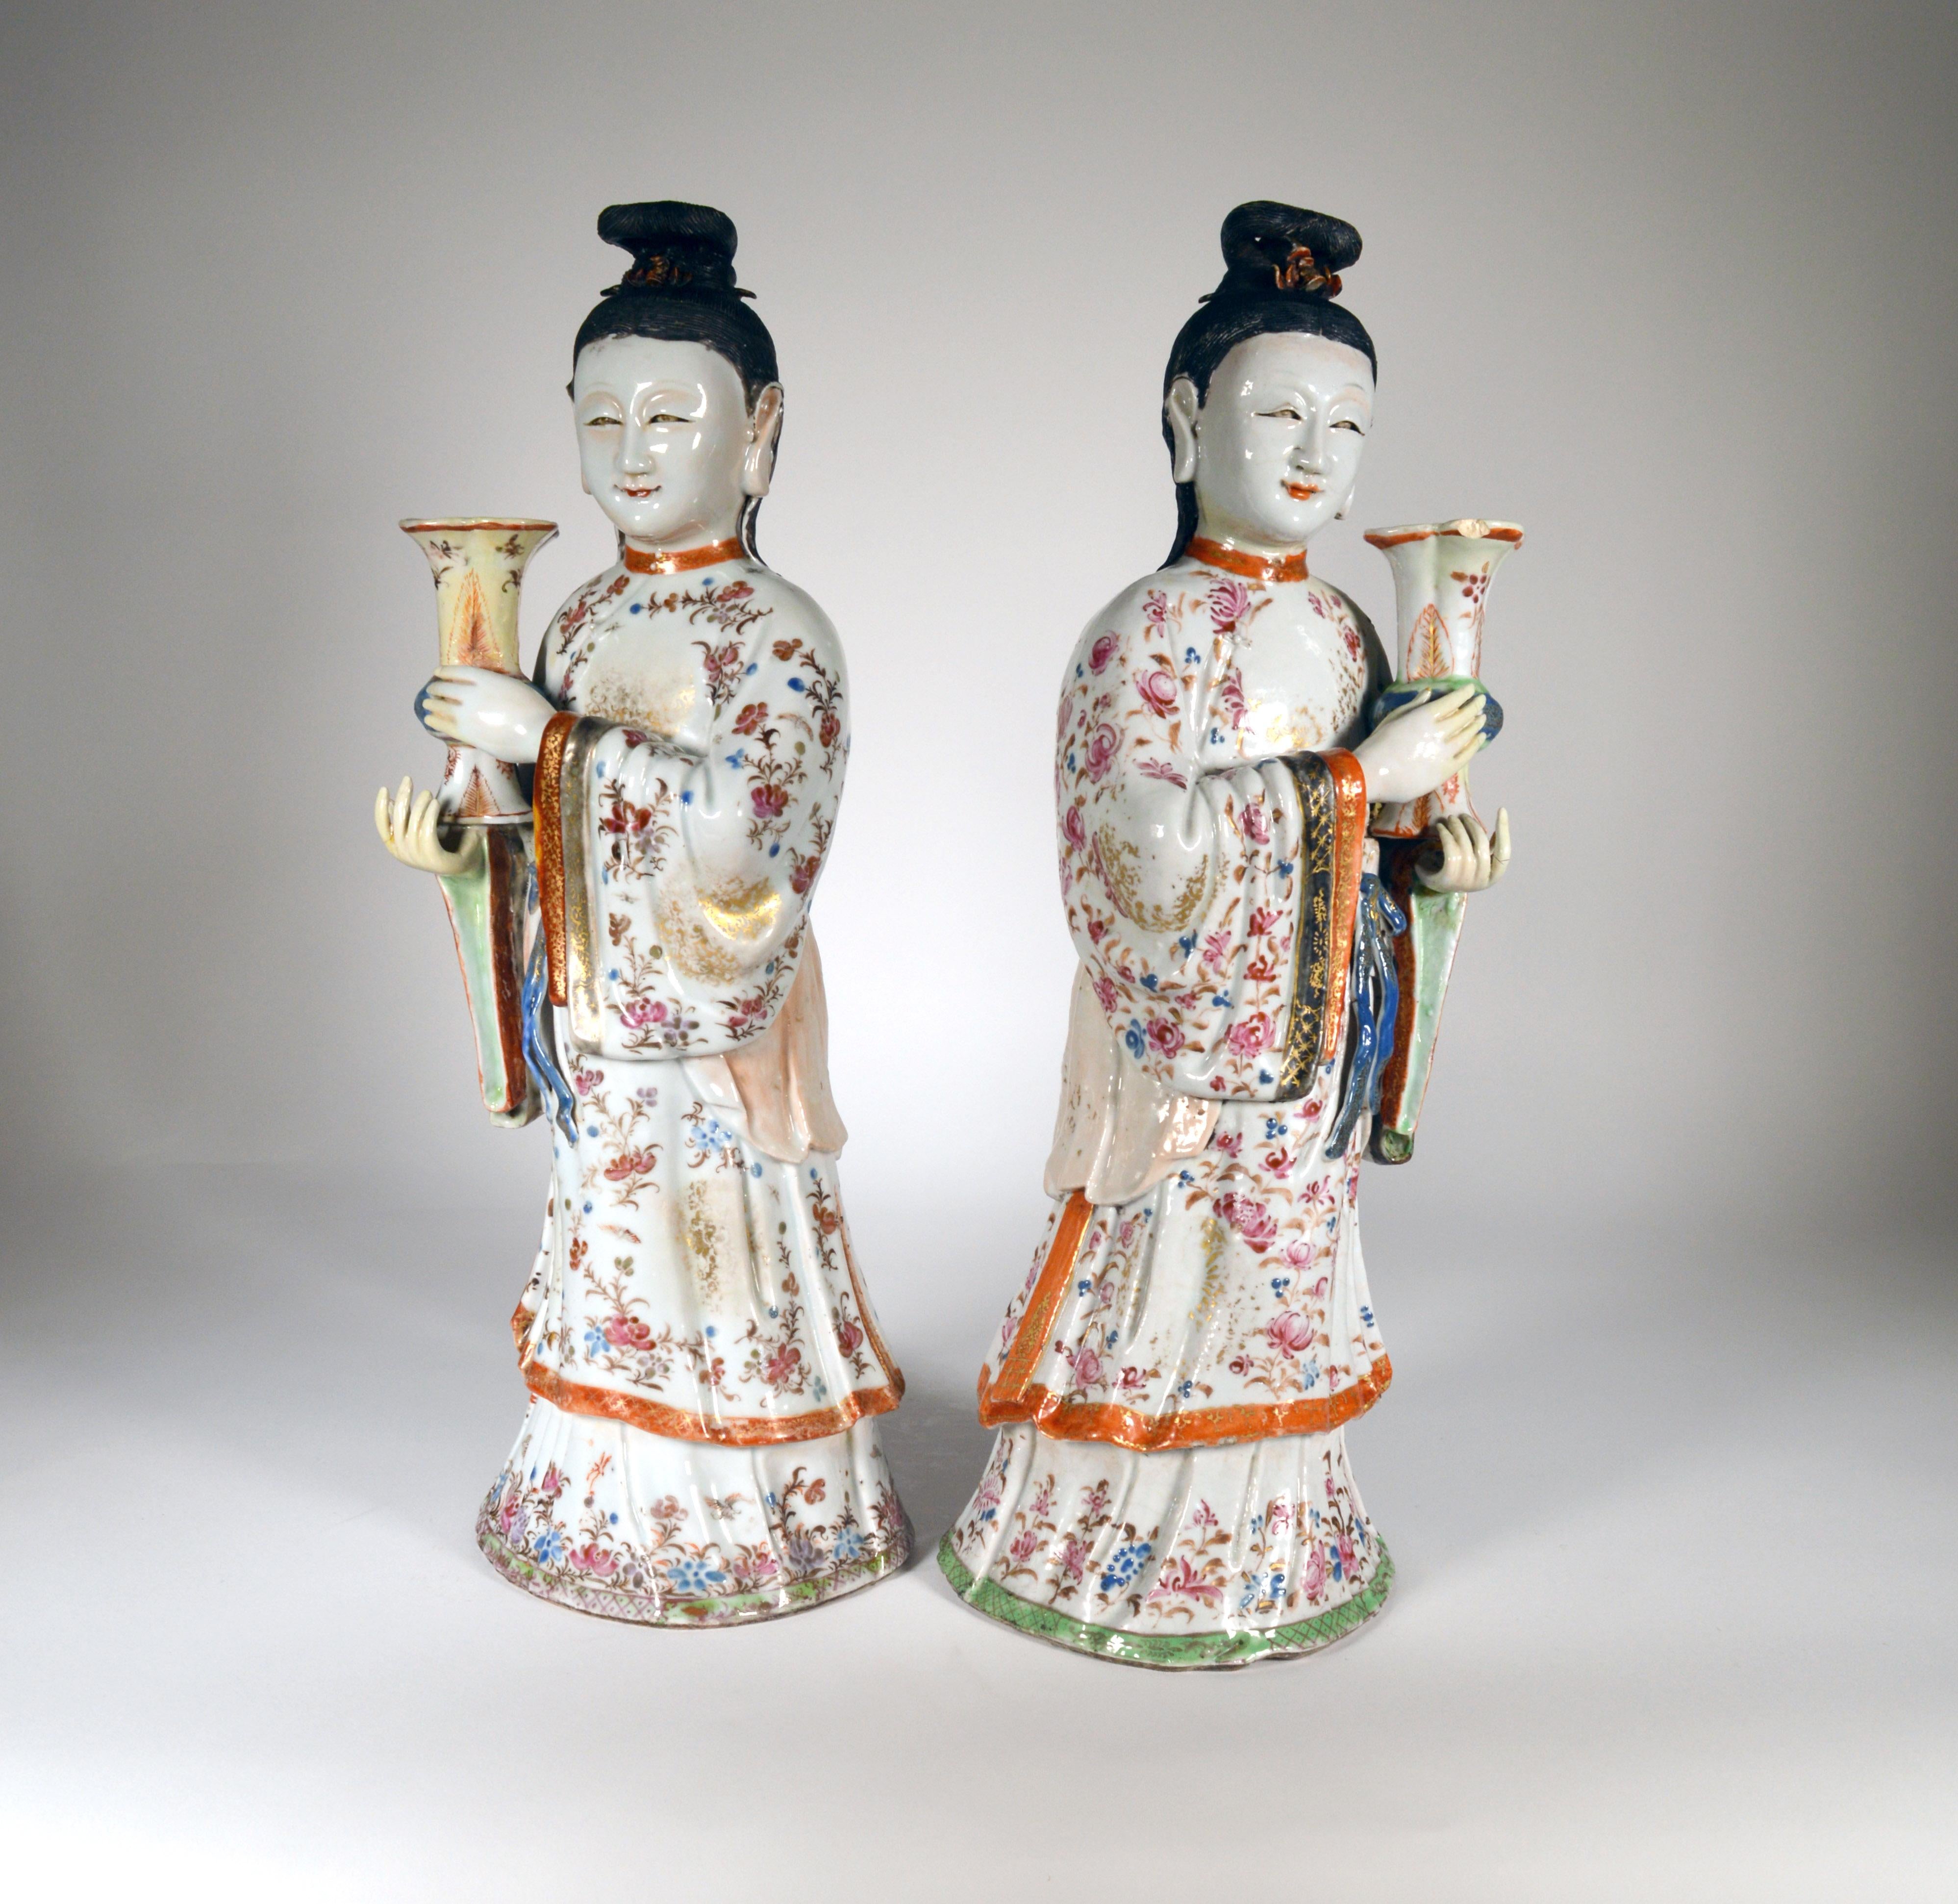 Chinese Export Porcelain pair of maiden candlesticks, 
circa 1760-1775 
   

A pair of large Chinese Export figures of standing maidens holding gu form vases as candle sconces, in “Famille Rose” enamels with robes painted with gilt and “Famille